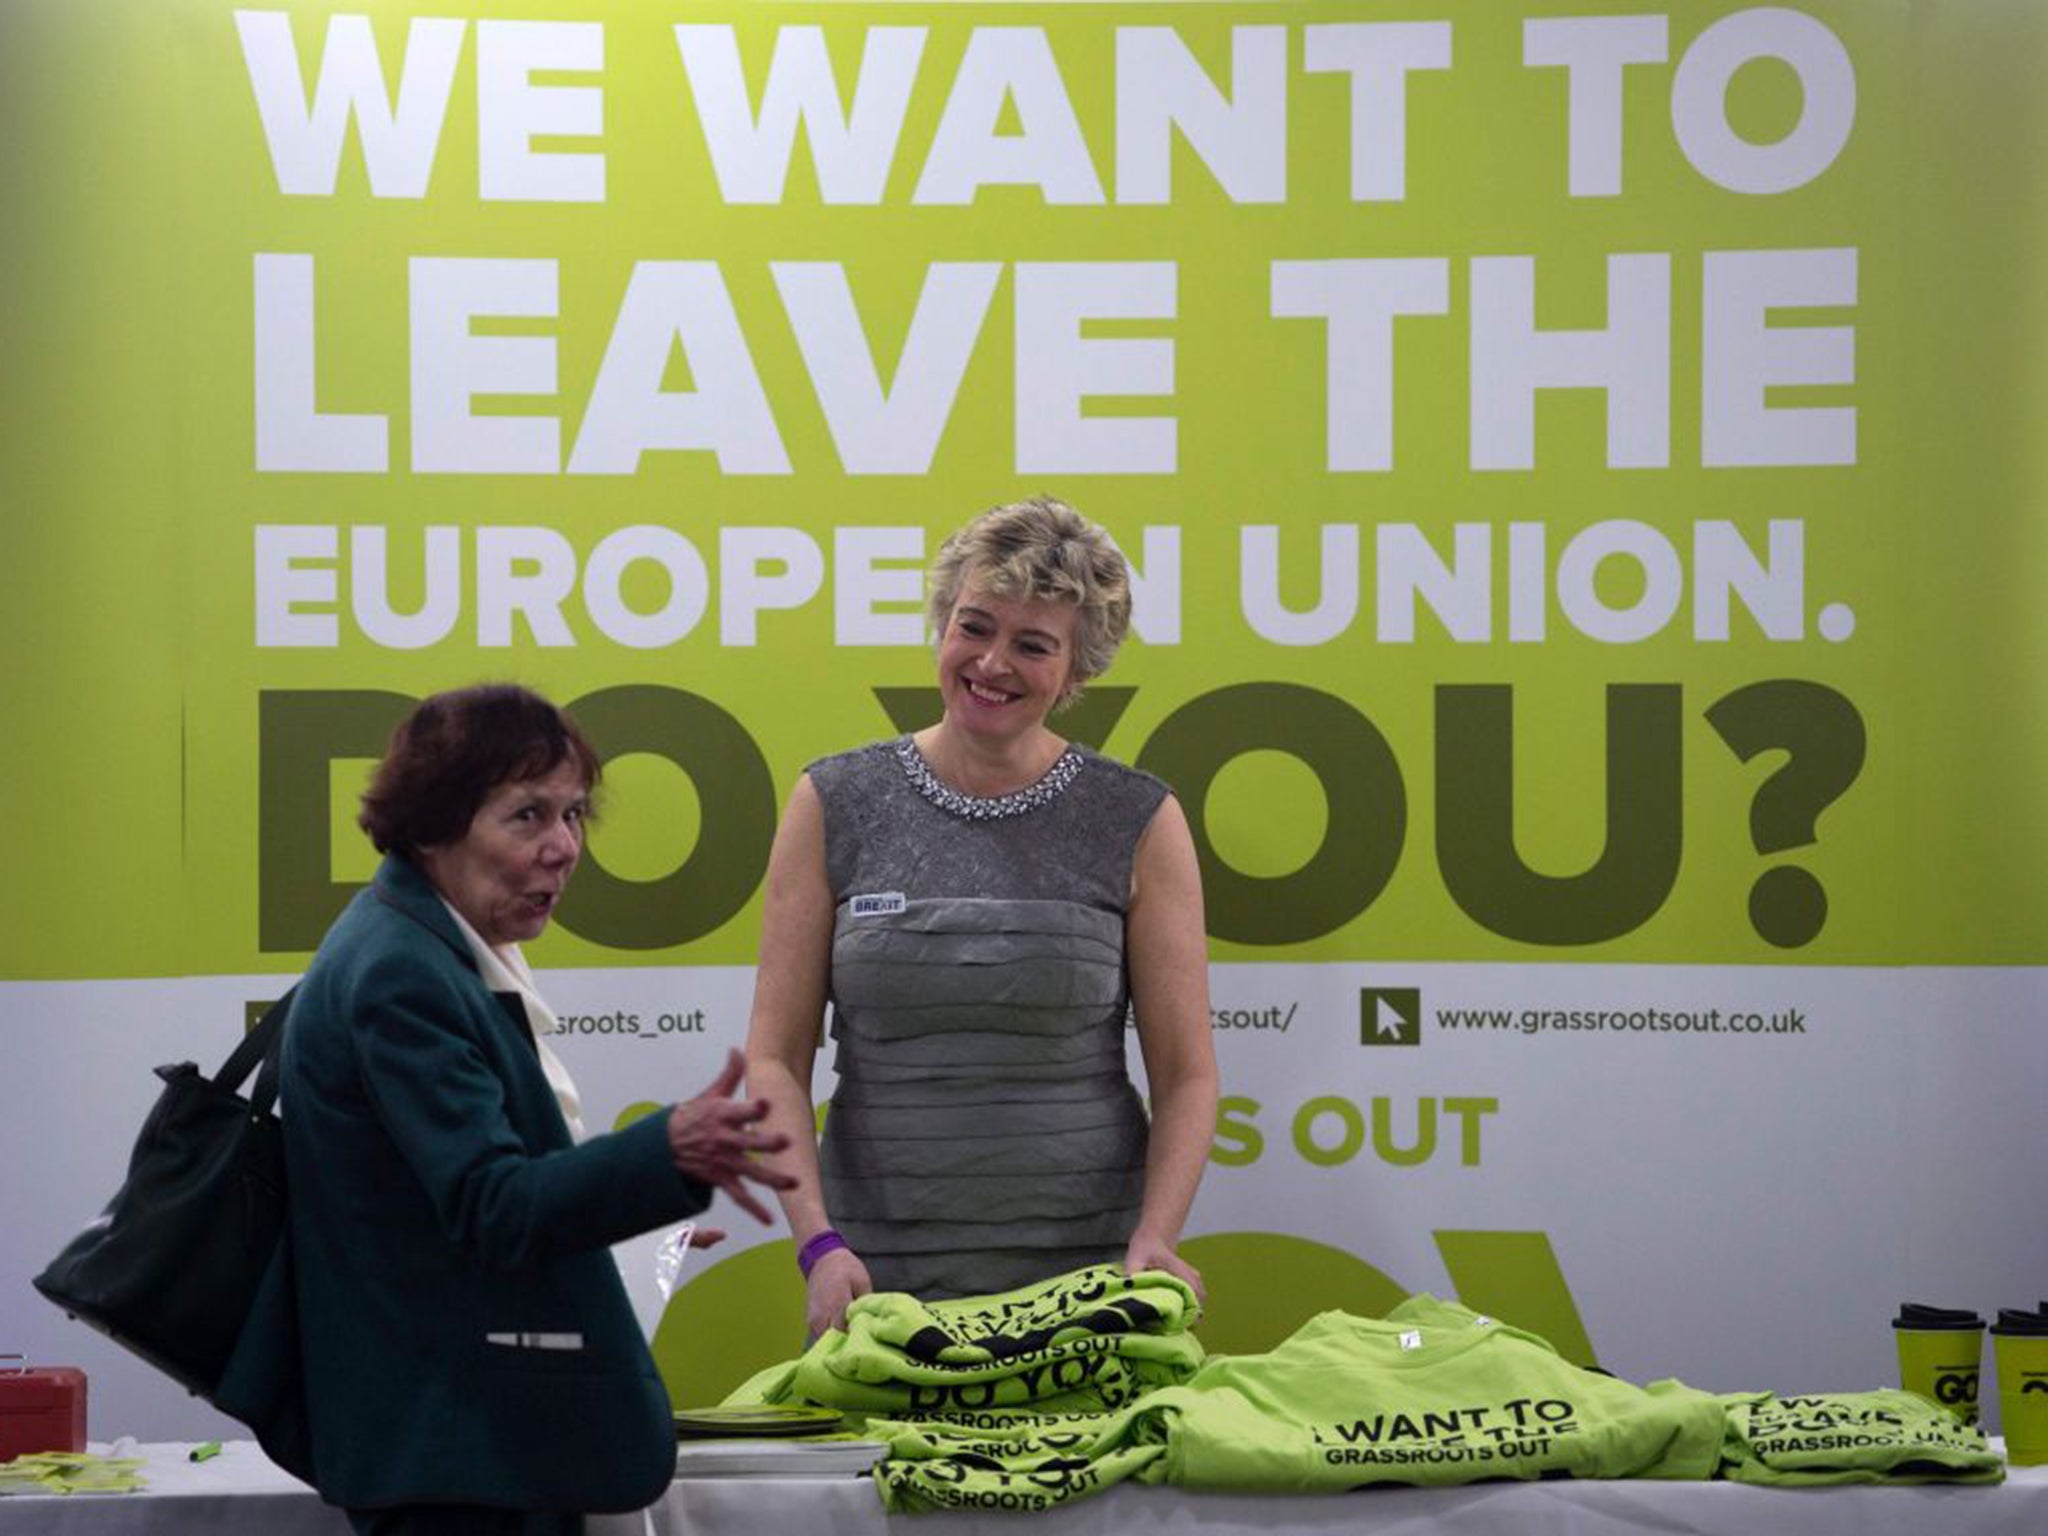 &#13;
Grassroots Out at Ukip’s conference in Llandudno on Saturday &#13;